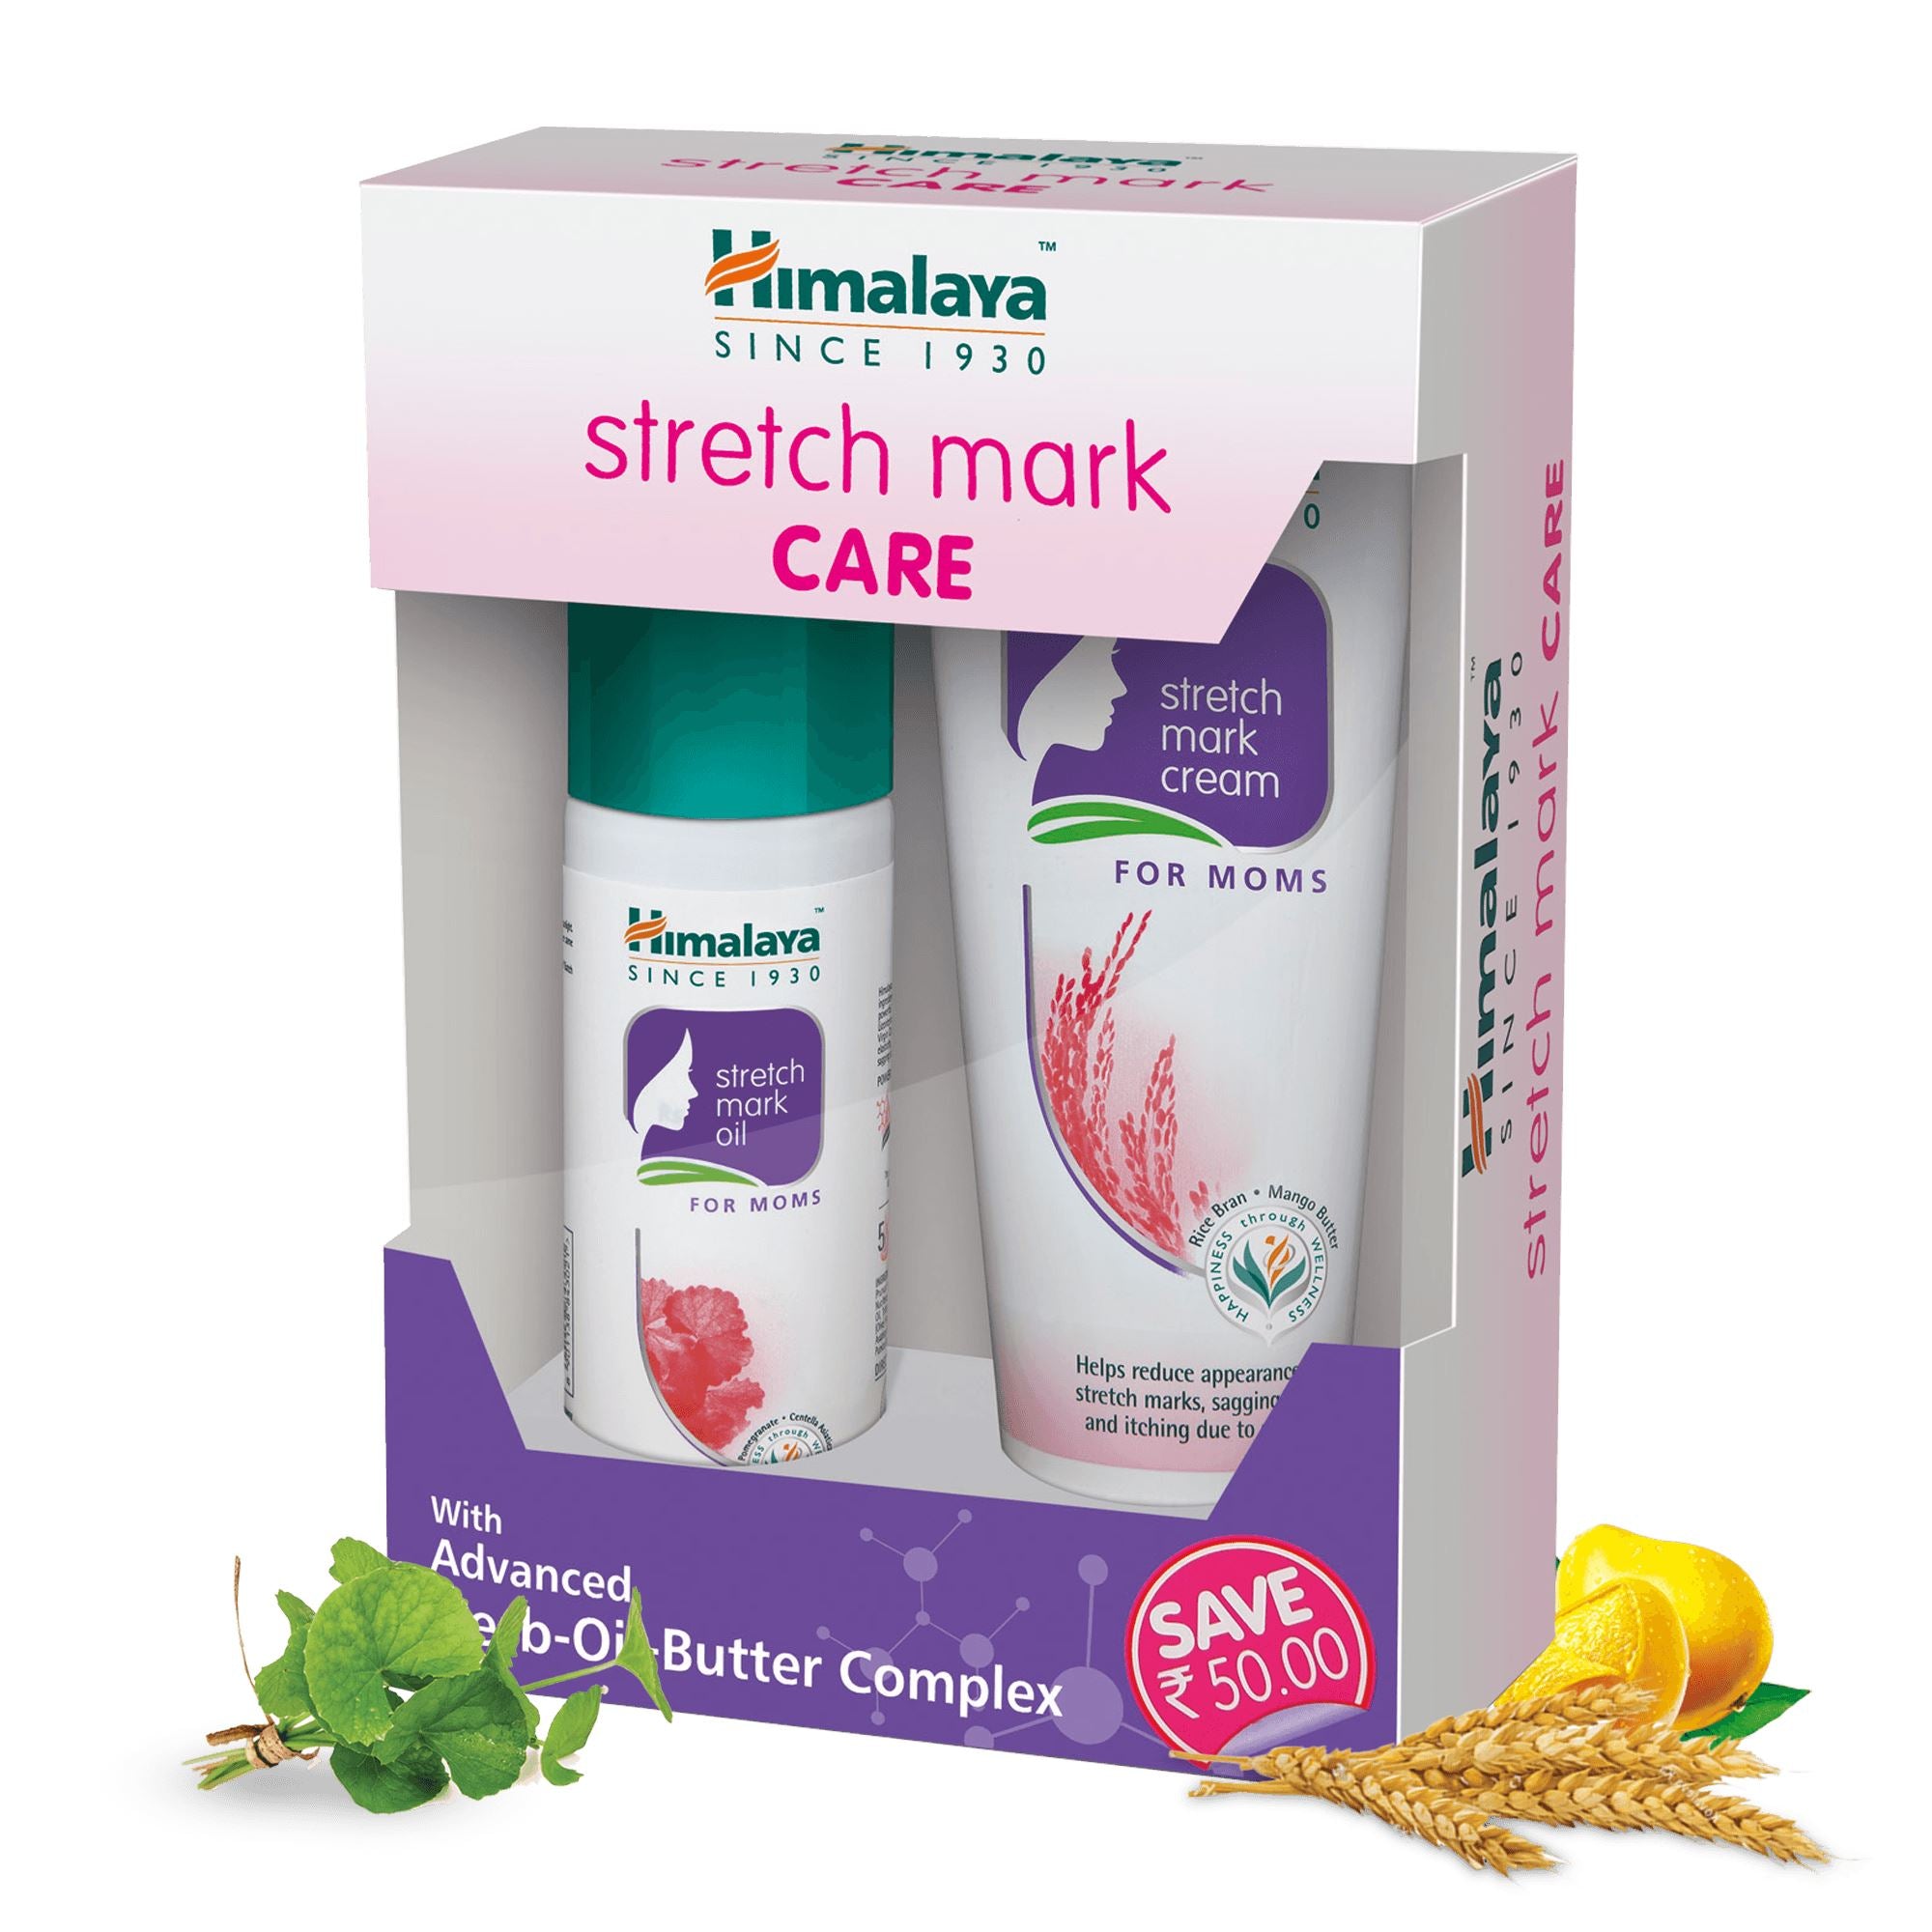 Himalaya Stretch Mark Care - Helps reduce stretch marks, sagging skin, and itching due to dryness